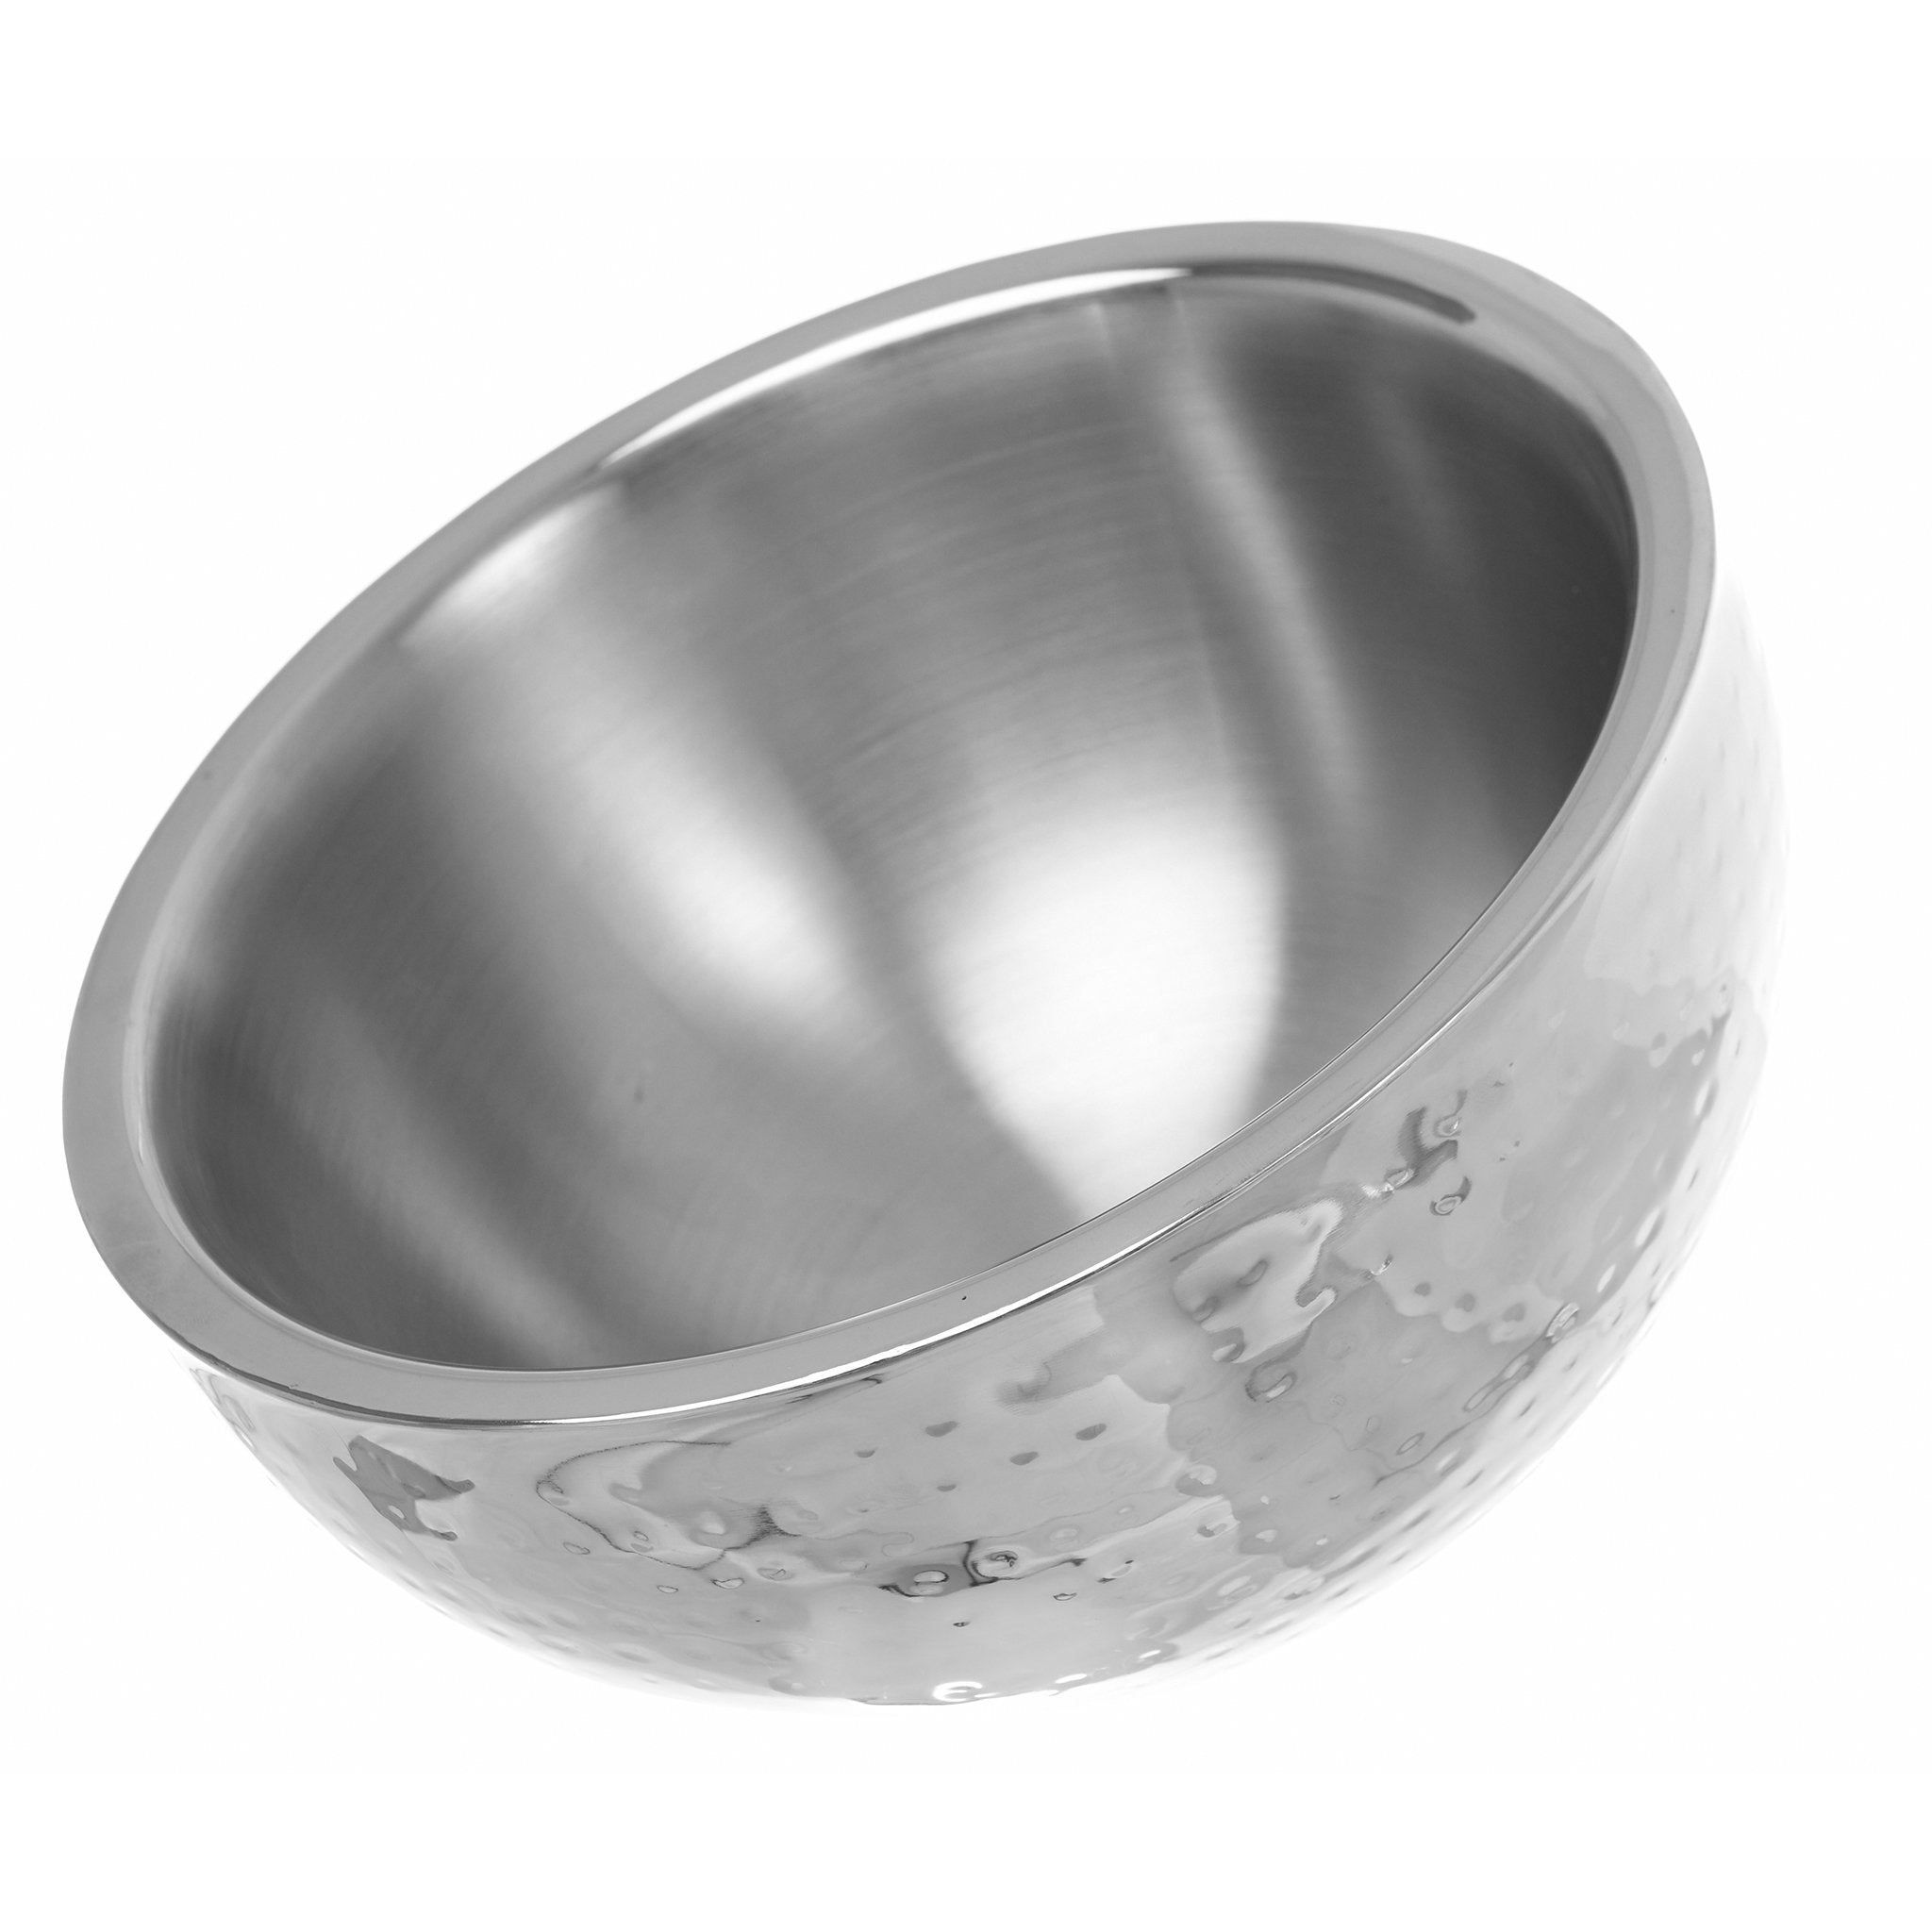 Medium Round Hammered Bowl with Diagonal Base - Stainless Steel - 20cm - 80003988